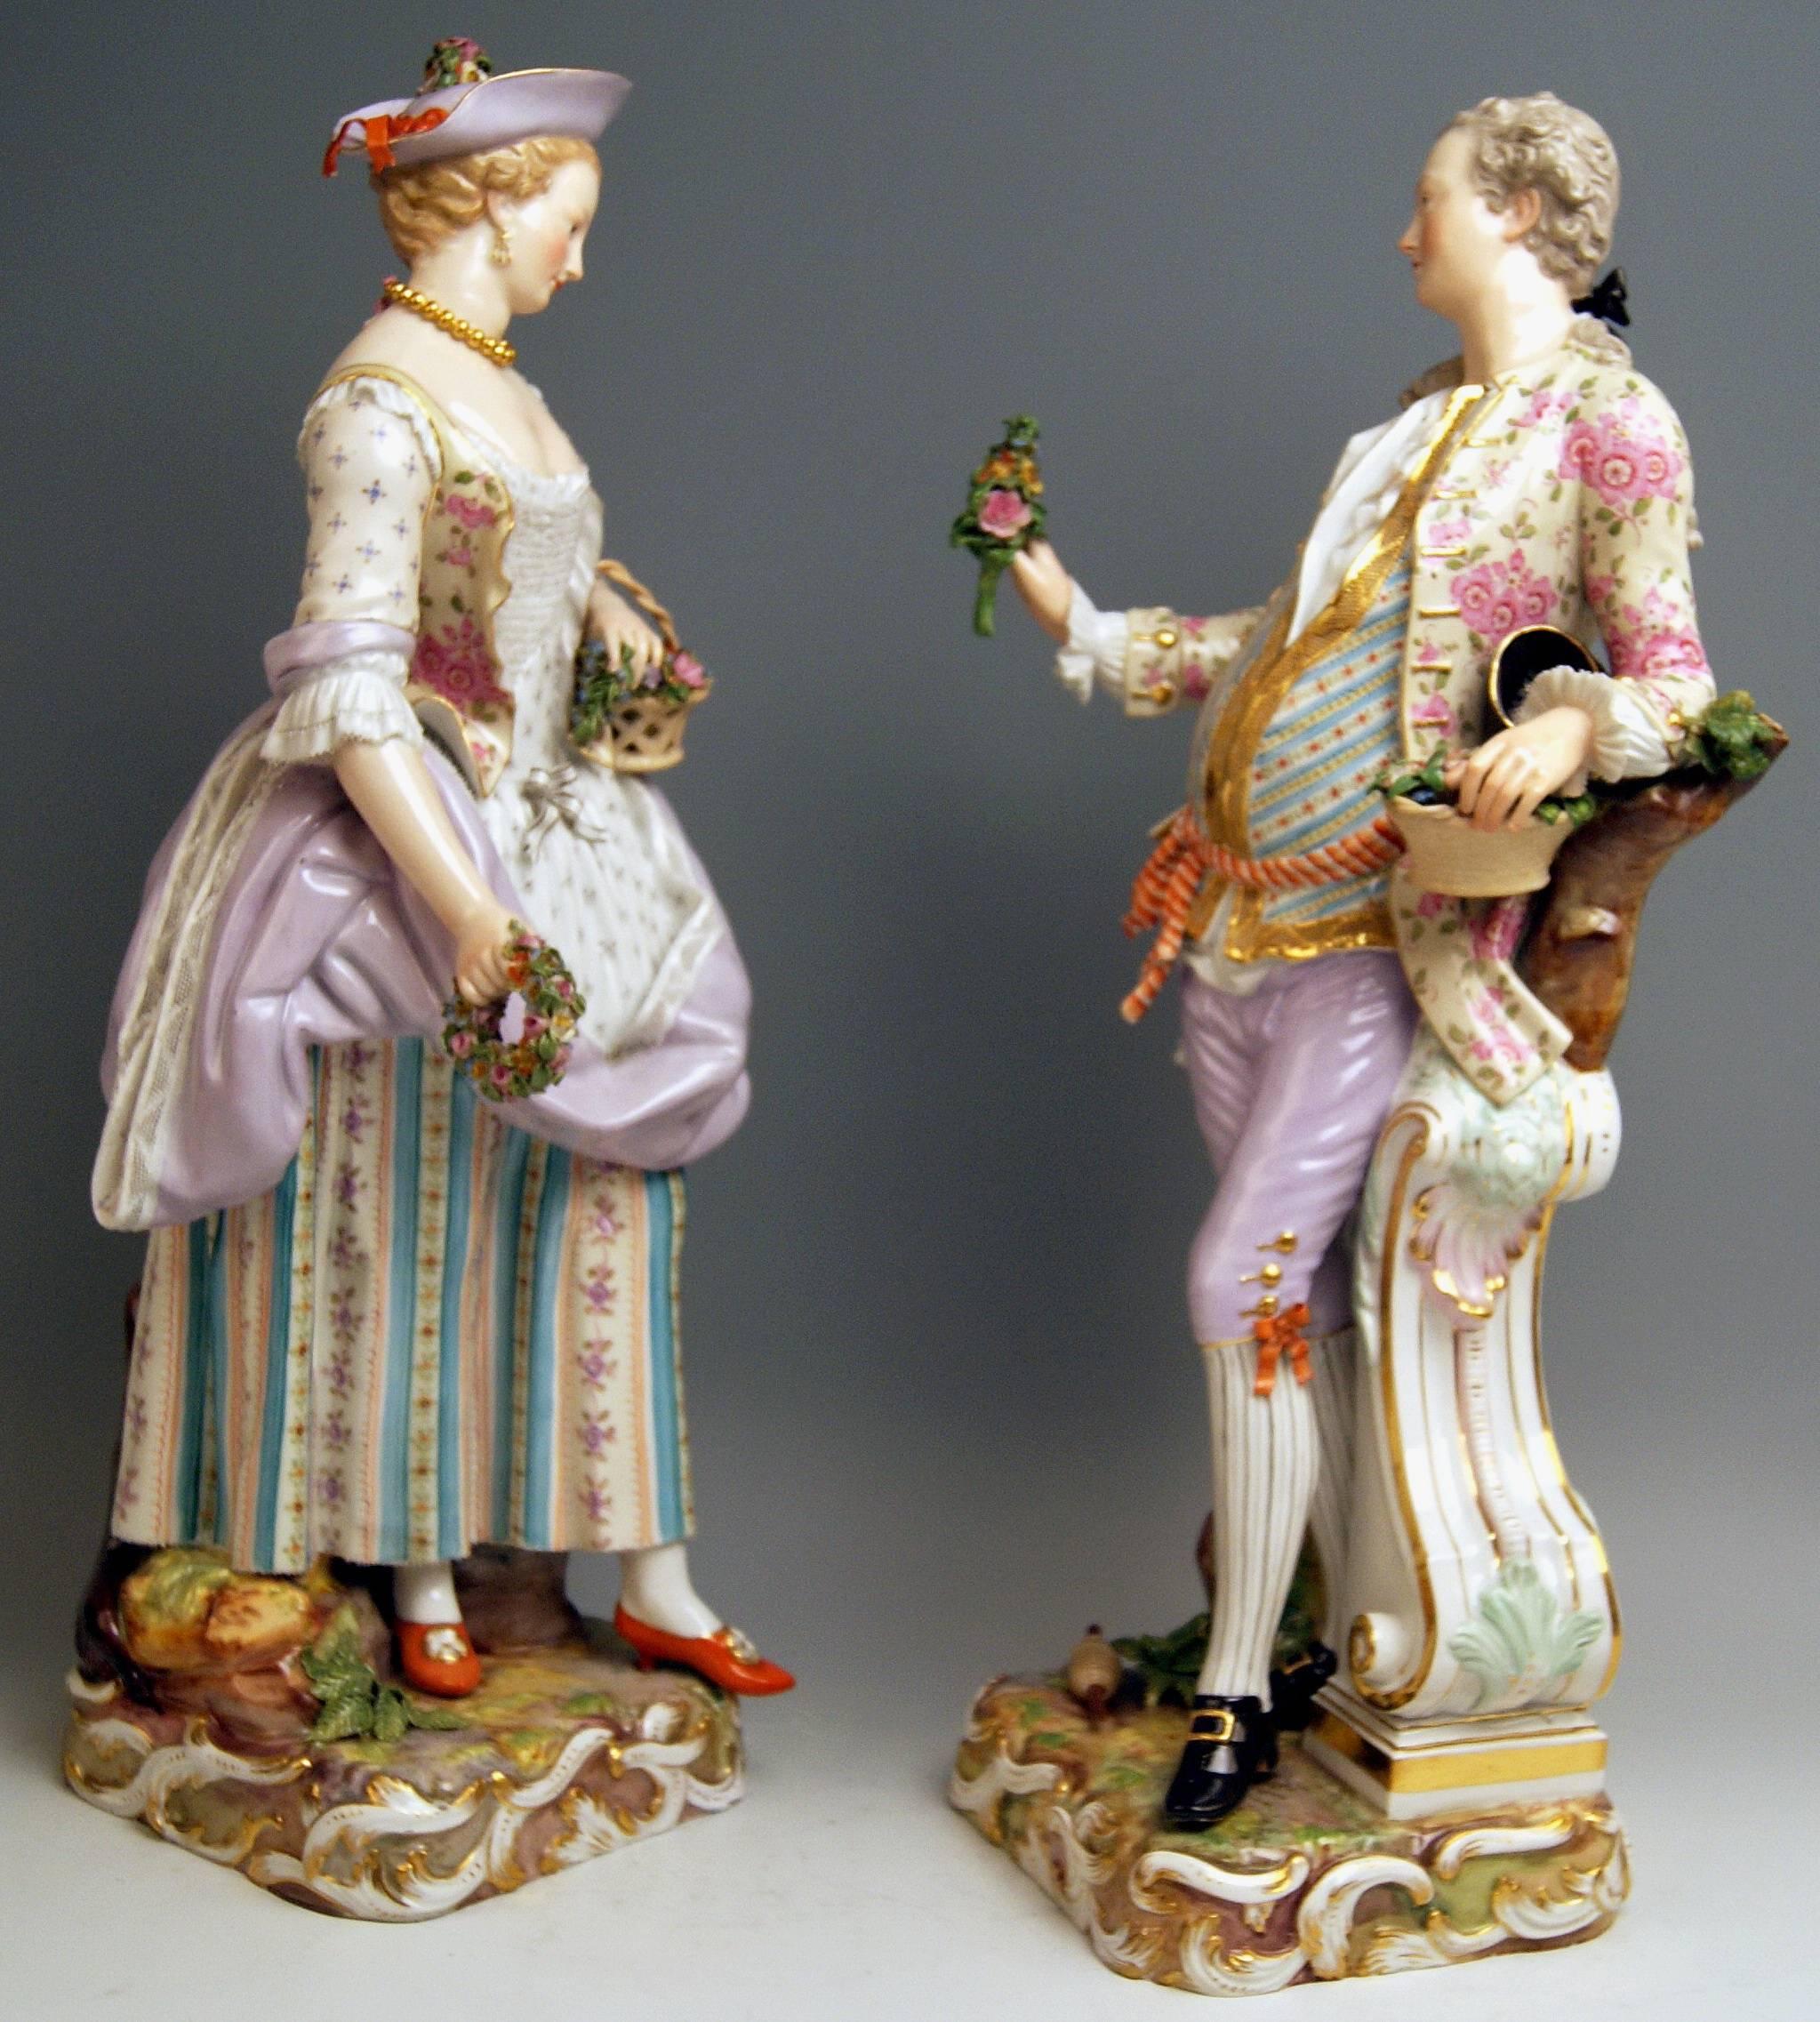 Meissen most remarkable tall figurine group: 
Pair of gardeners

Measures / dimensions:
height 19.68 inches / 50.0 cm (male gardener)
height 19.29 inches / 49.0 cm (female gardener)
width 5.90 inches / 15.0 cm
depth 7.48 inches / 19.0